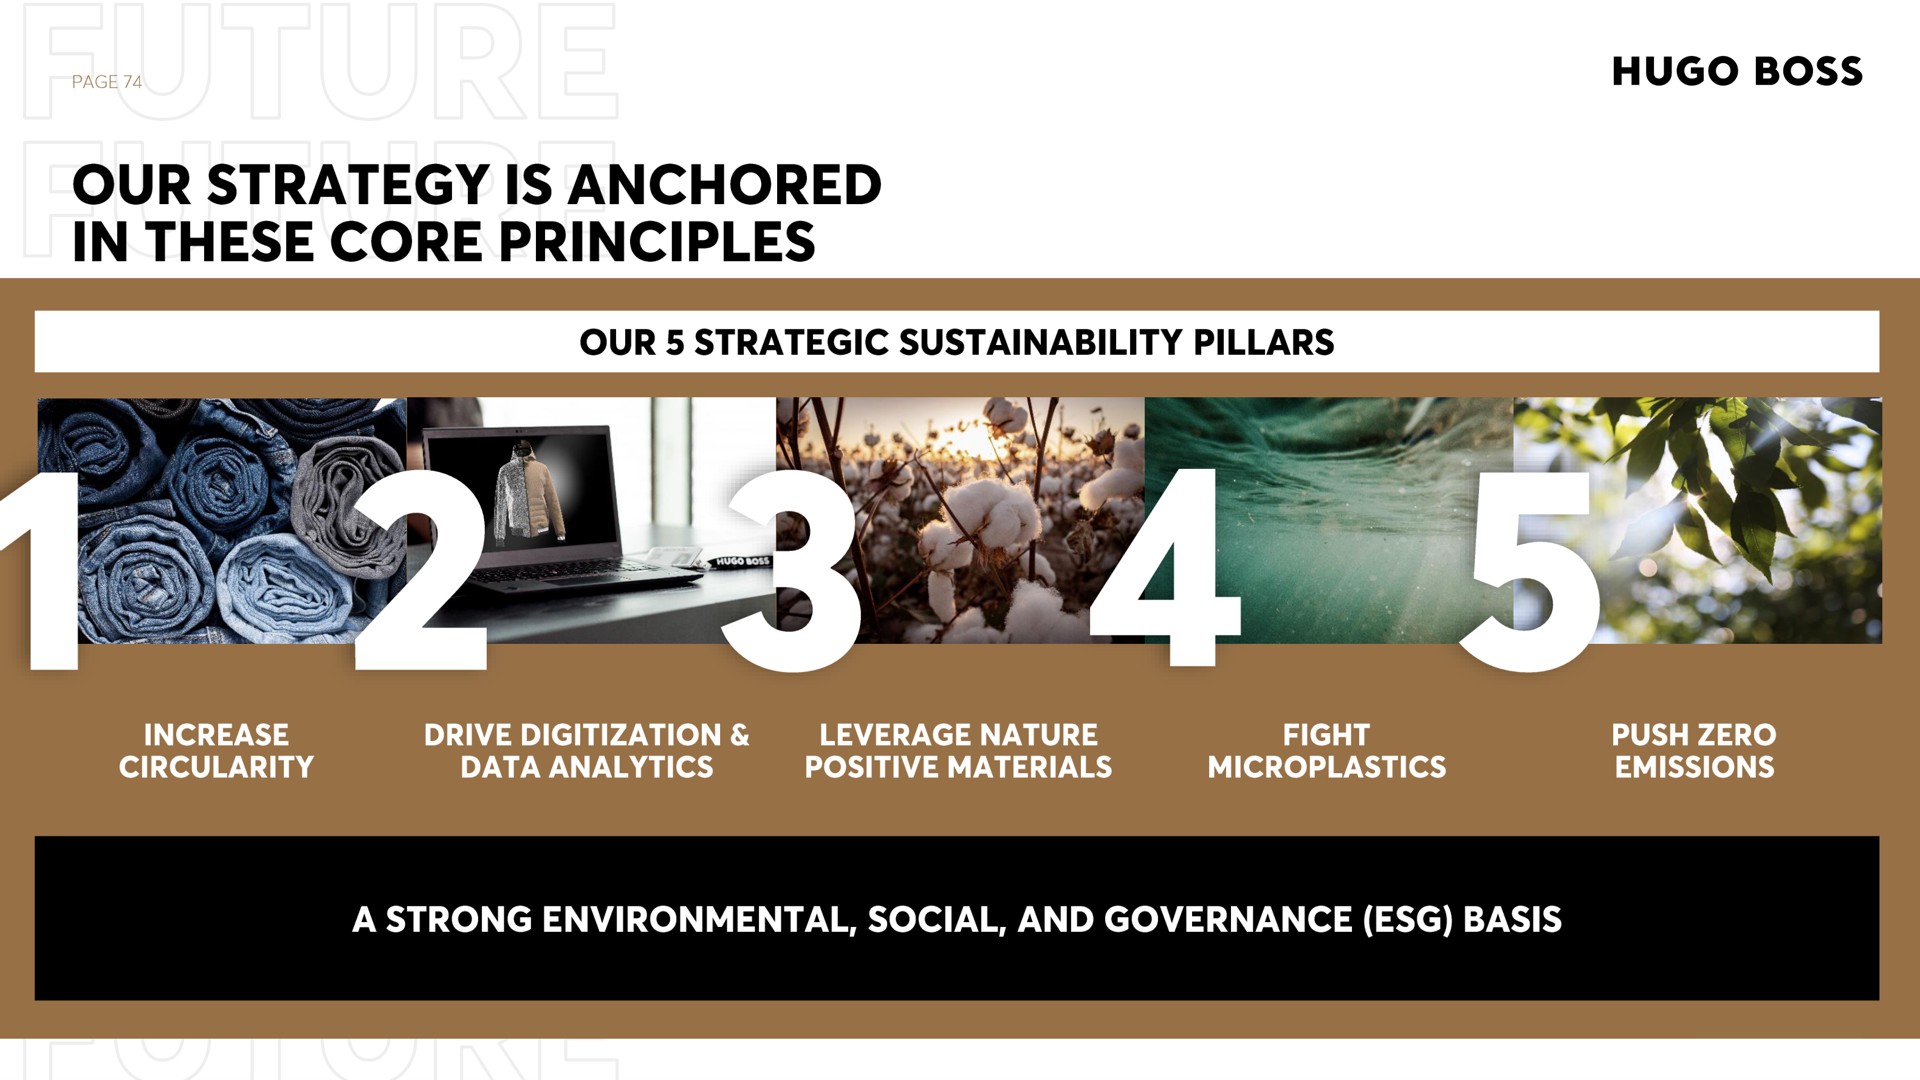 our strategy is anchored in these core principles our strategic pillars boss increase circularity drive data analytics bats fight we push zero emissions a strong environmental social and governance basis | Hugo Boss